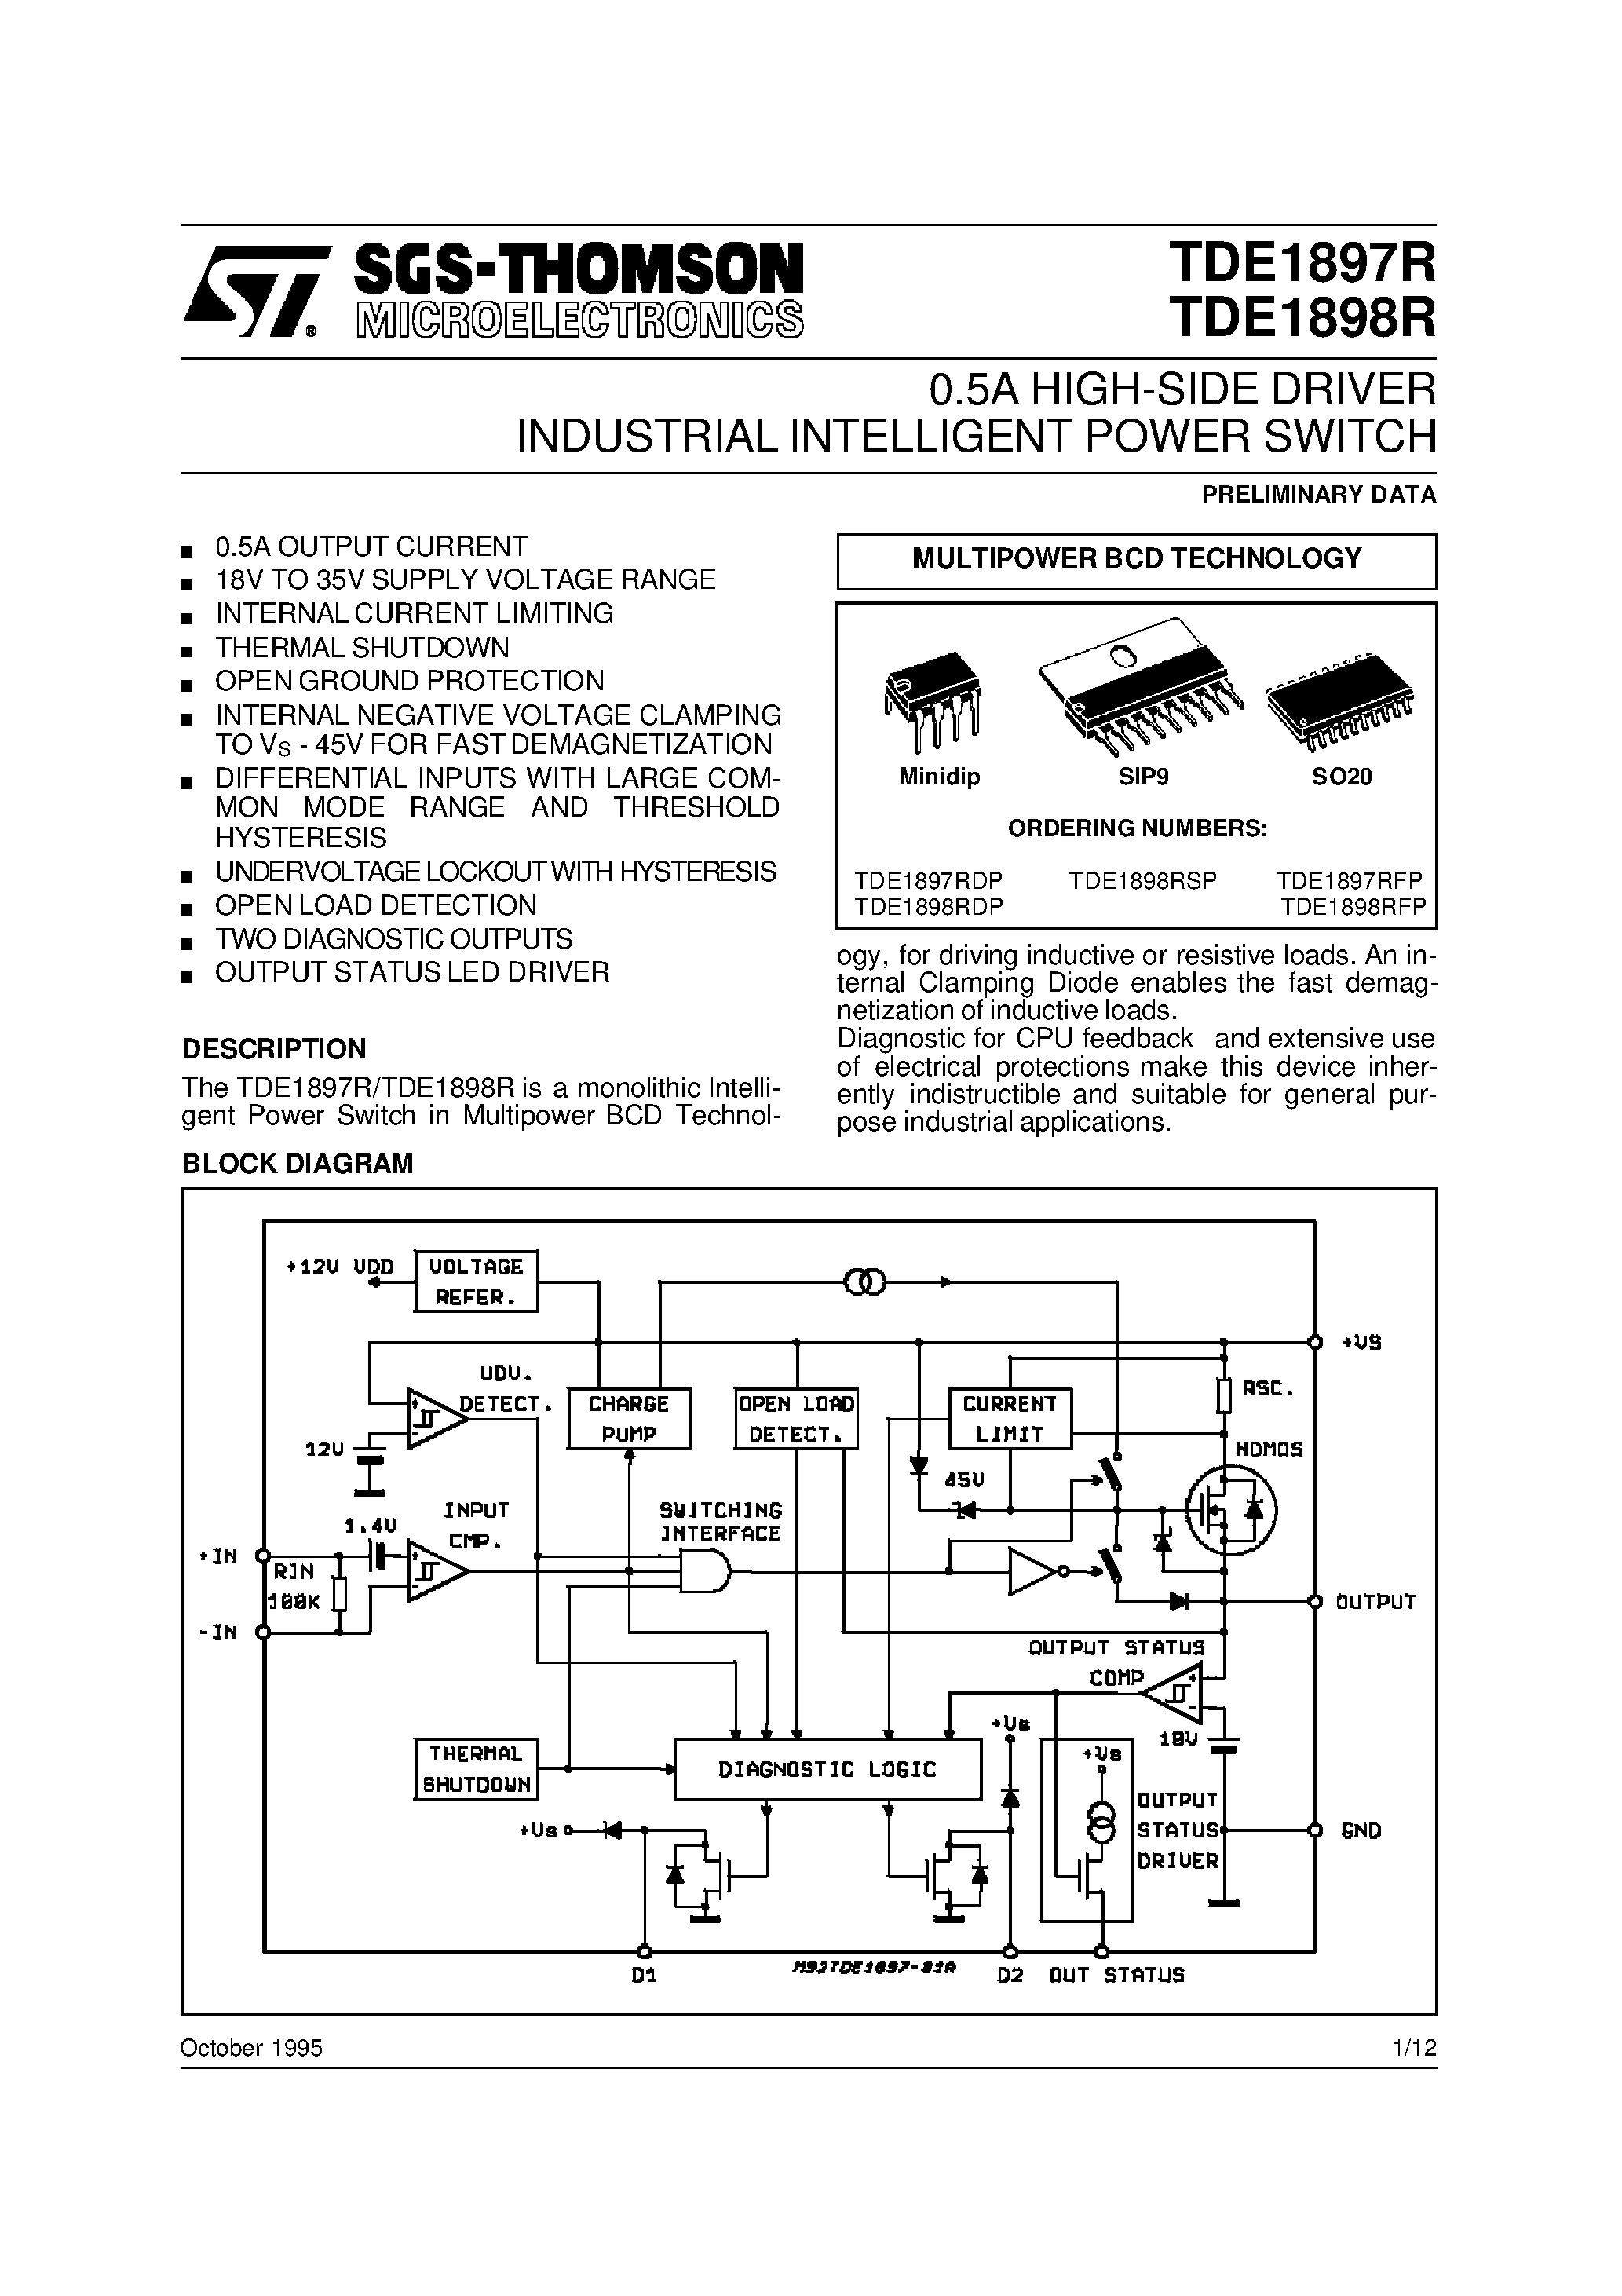 Даташит TDE1897R - 0.5A HIGH-SIDE DRIVER INDUSTRIAL INTELLIGENT POWER SWITCH страница 1